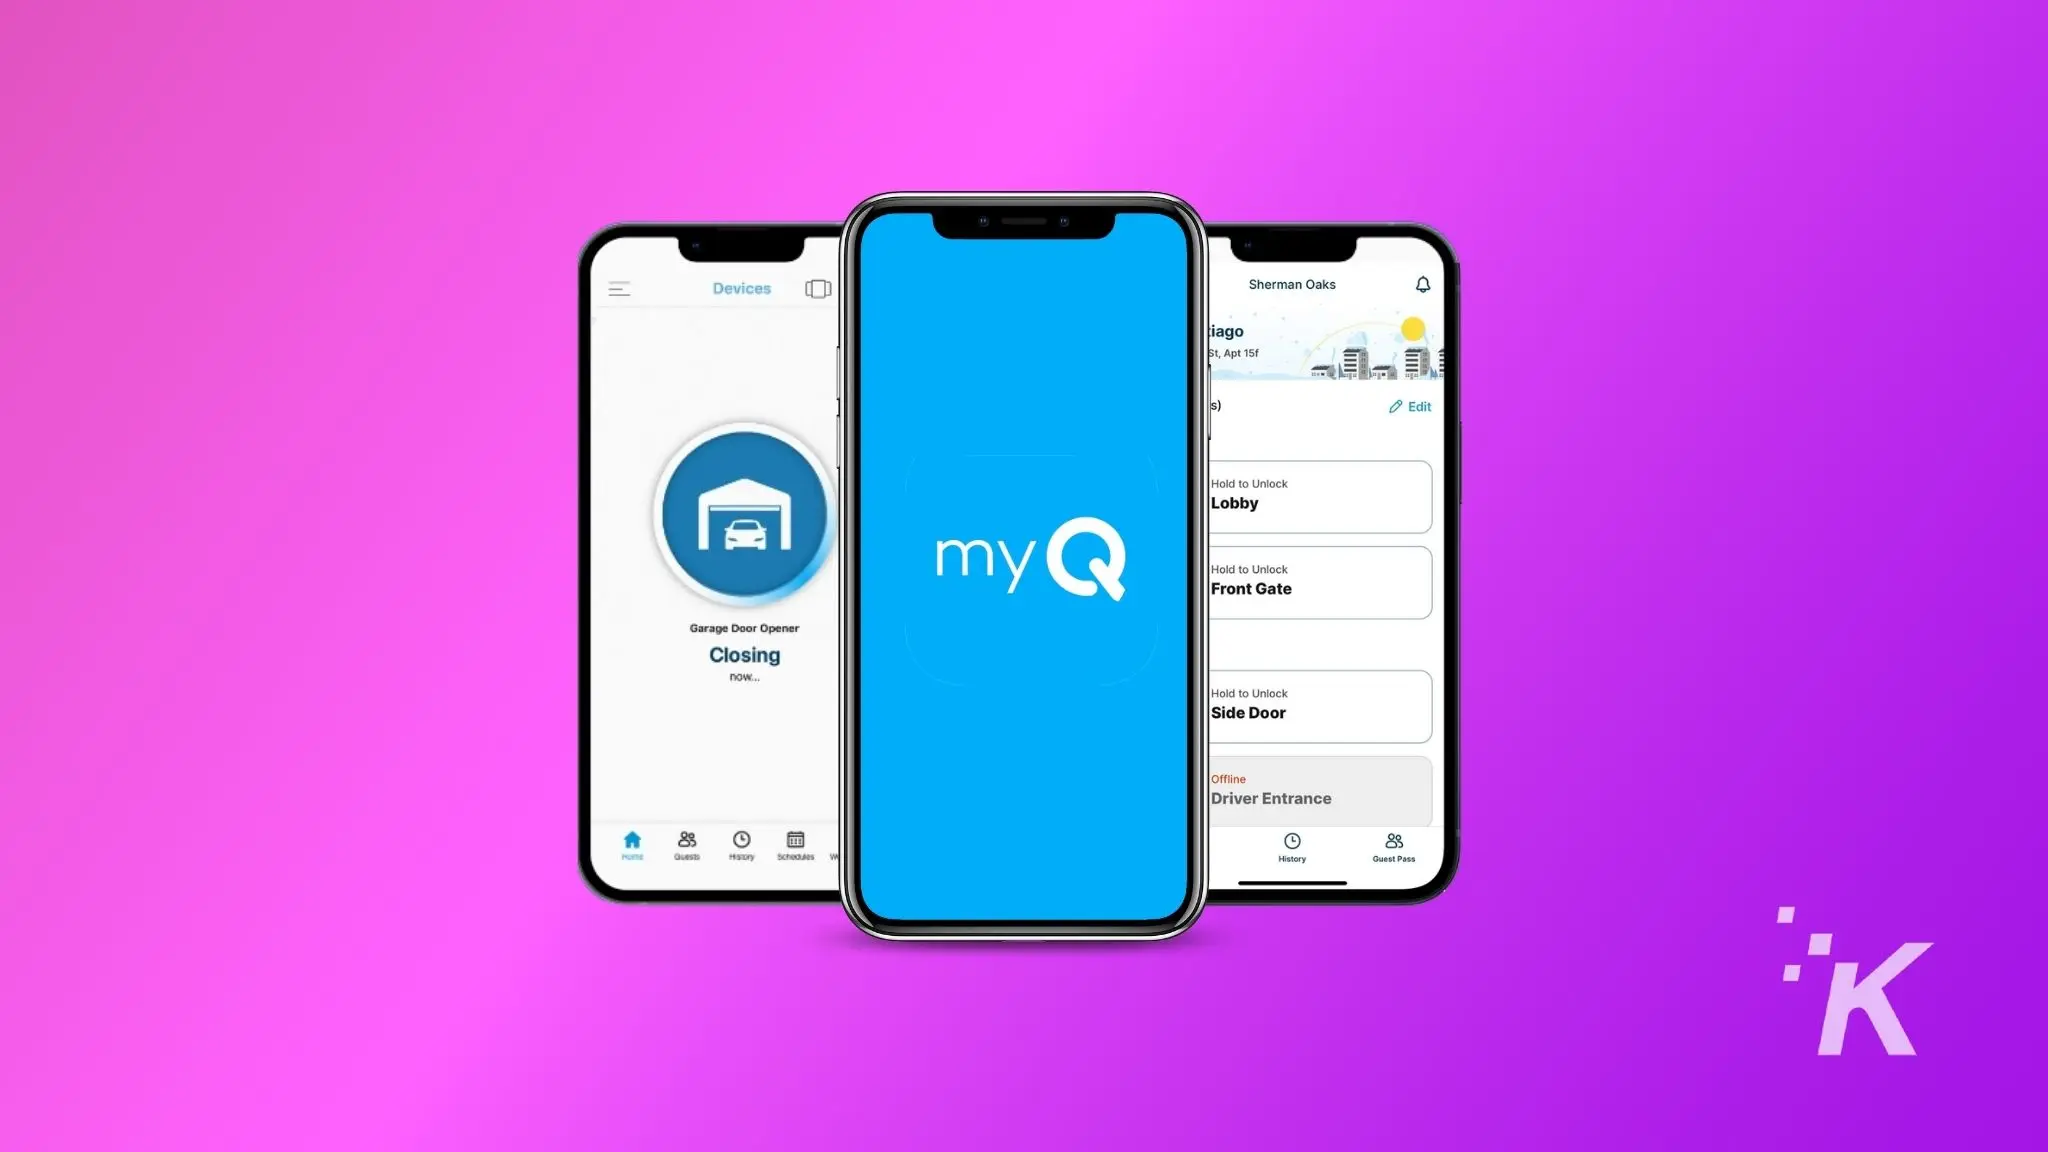 The image shows the myQ app interface opened on mobile phone screen